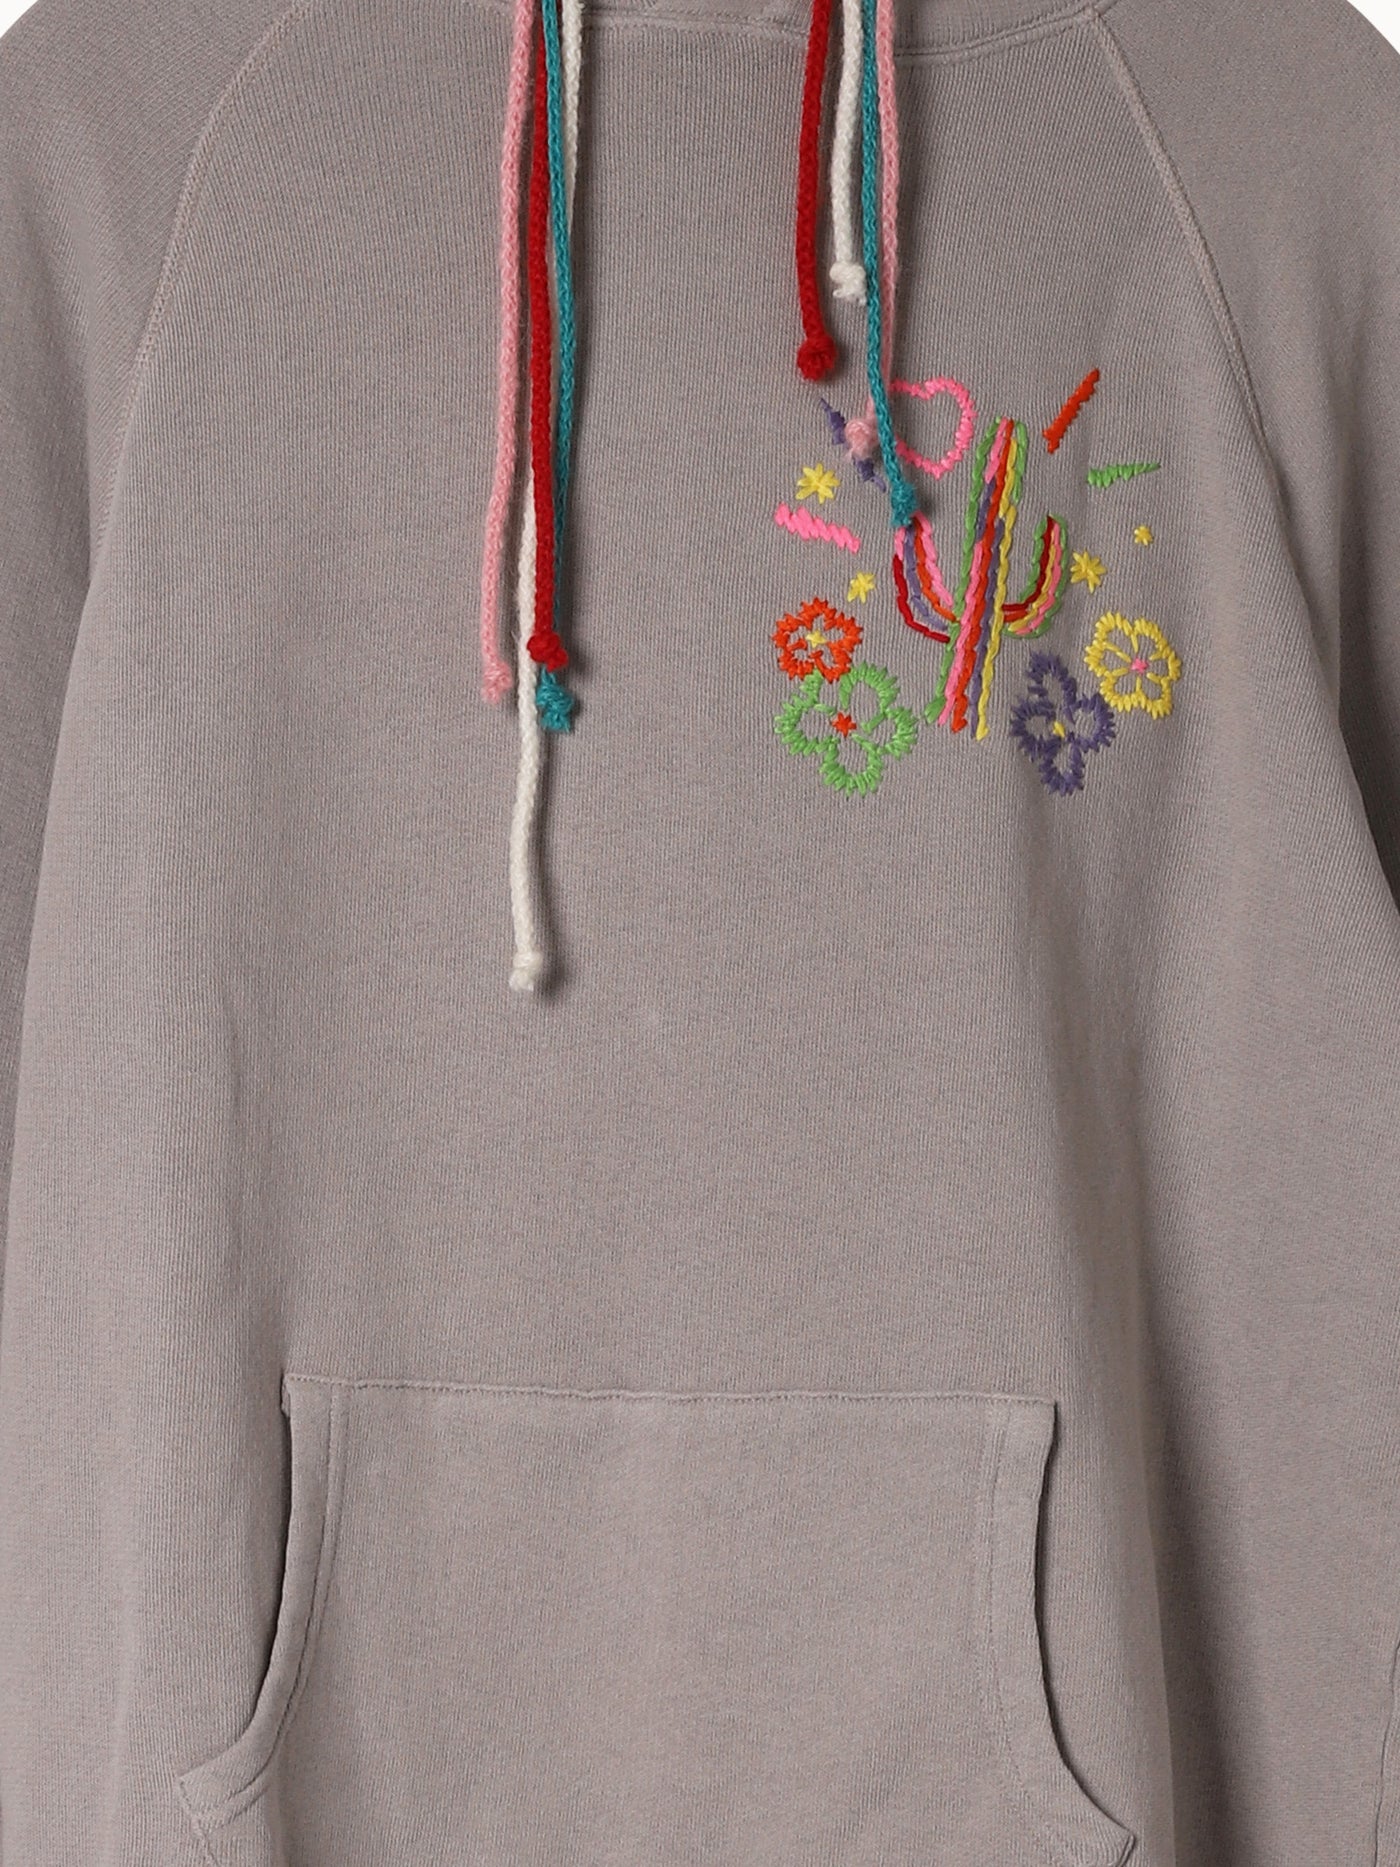 Embroidered Cactus Hoodie